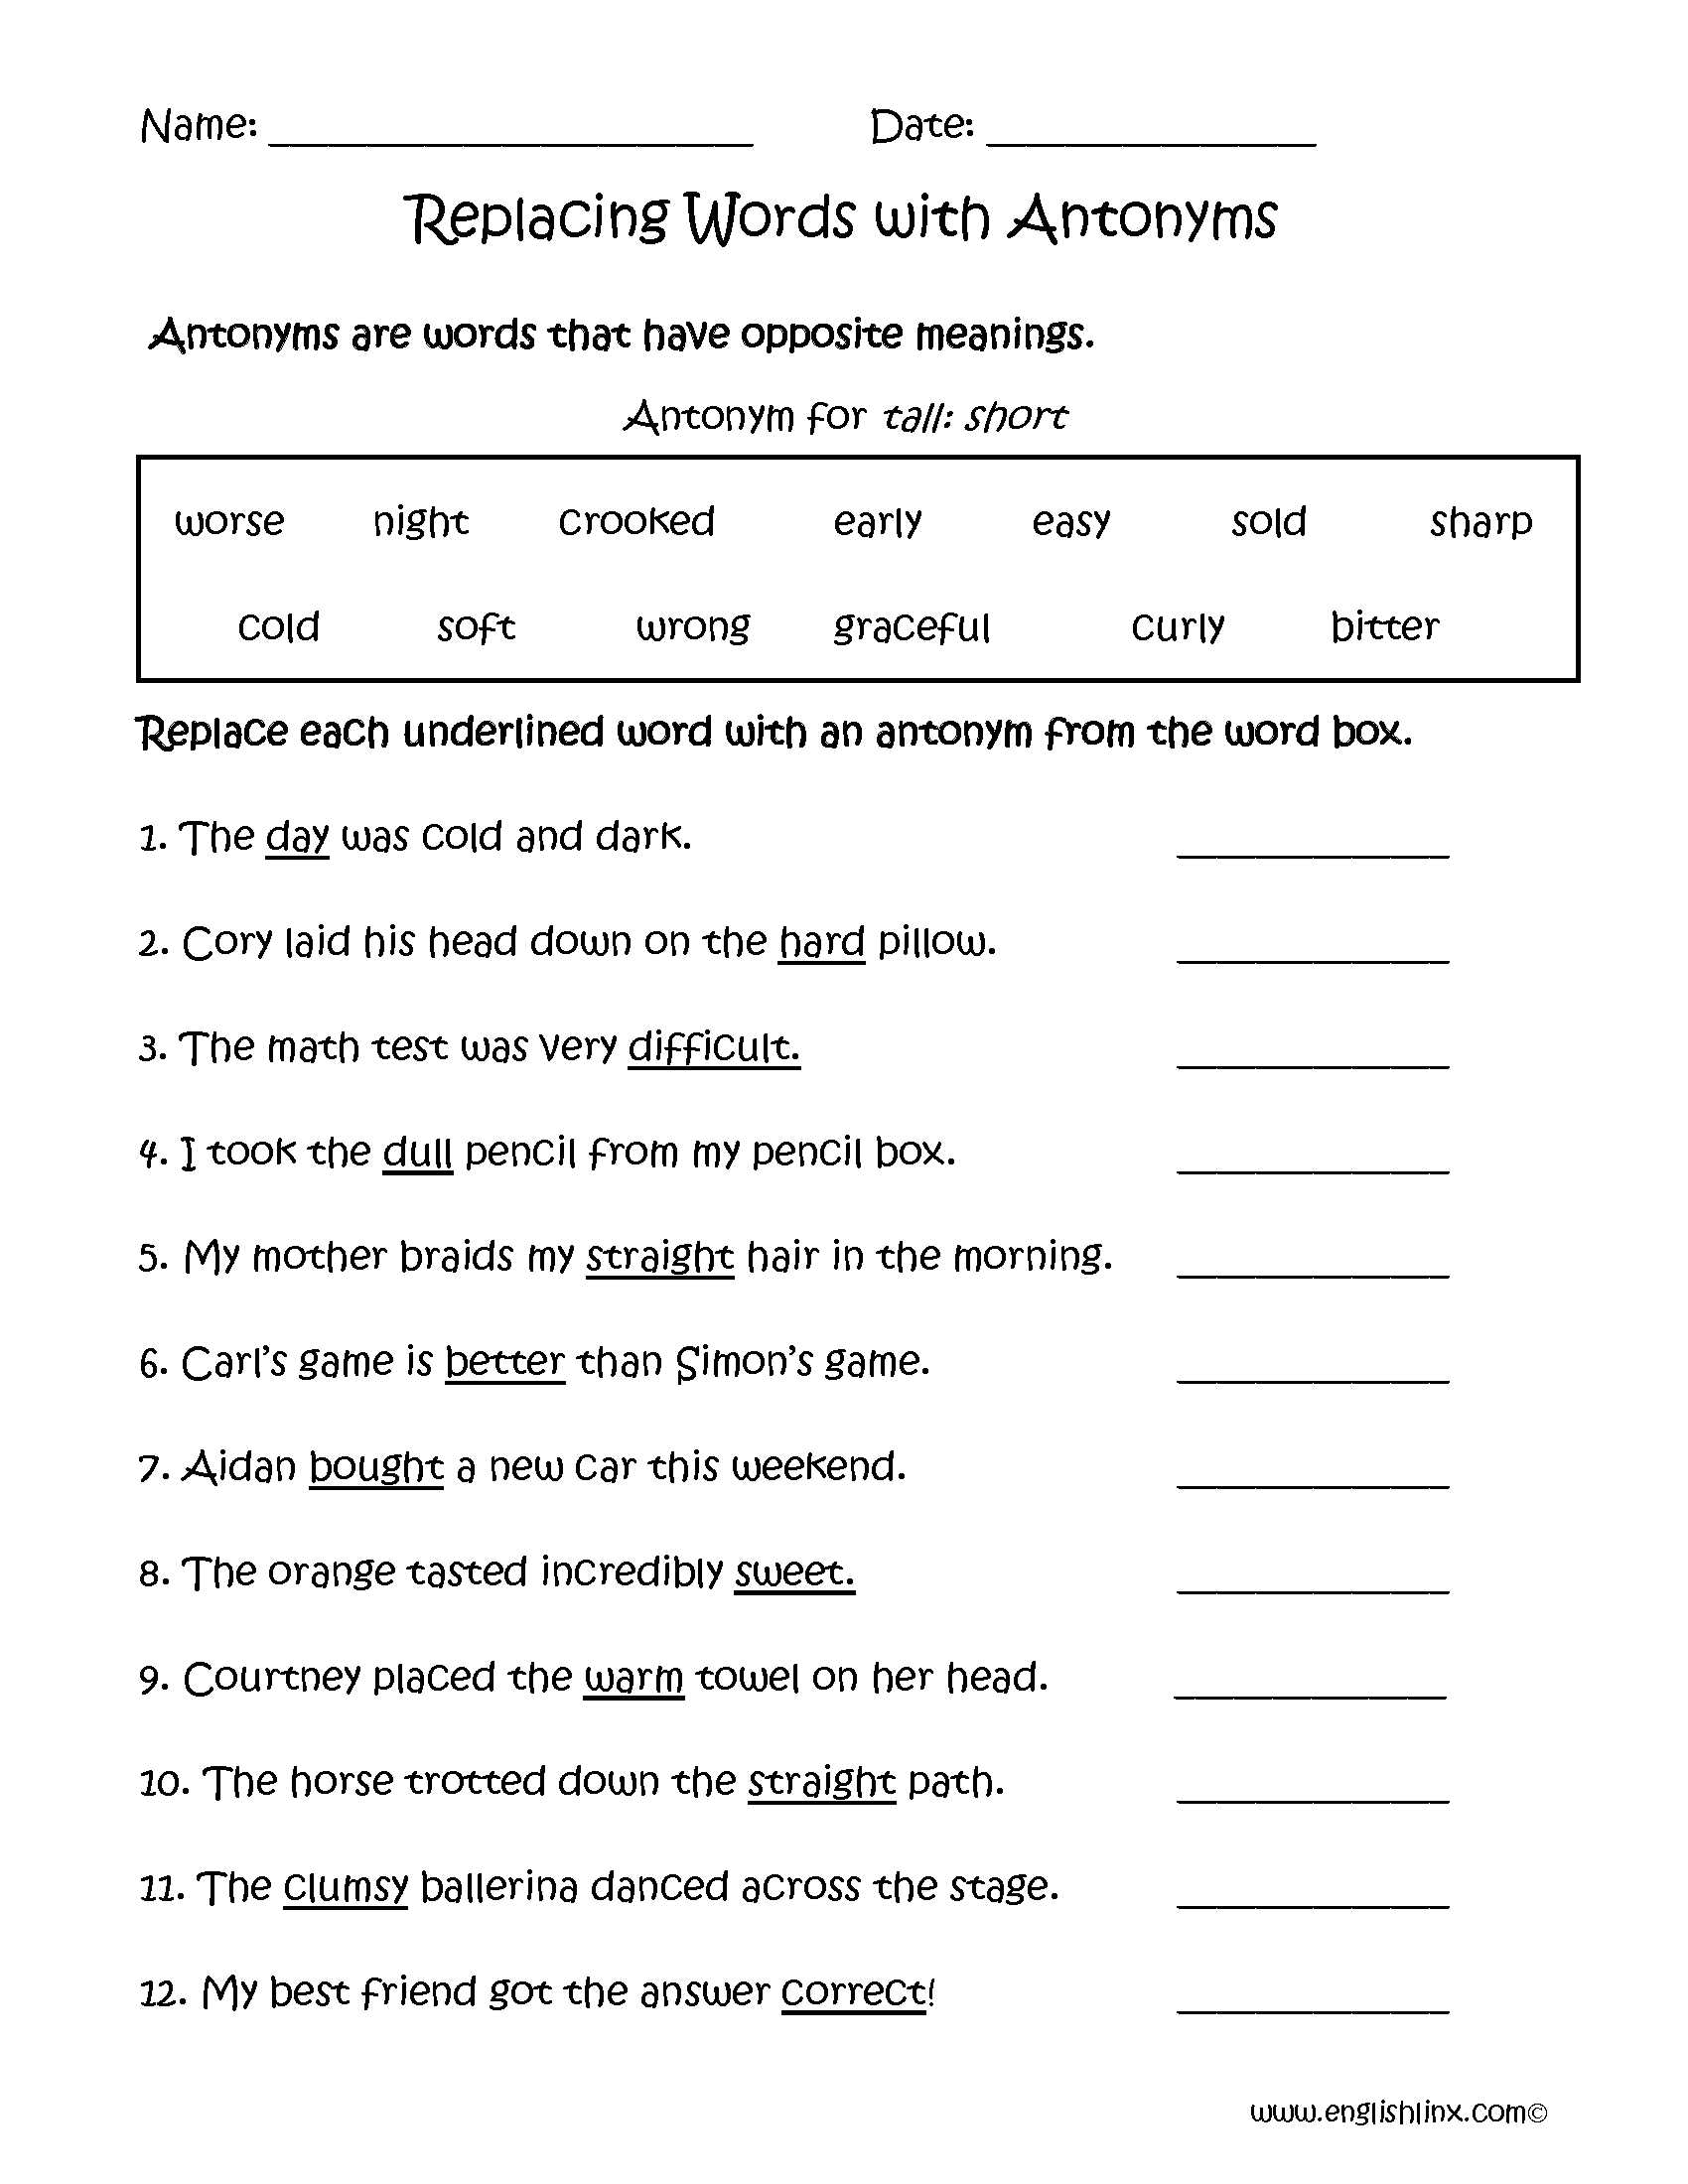 Bill Nye atmosphere Worksheet Answers together with Student Worksheet Best Replacing Words with Antonyms Worksheets